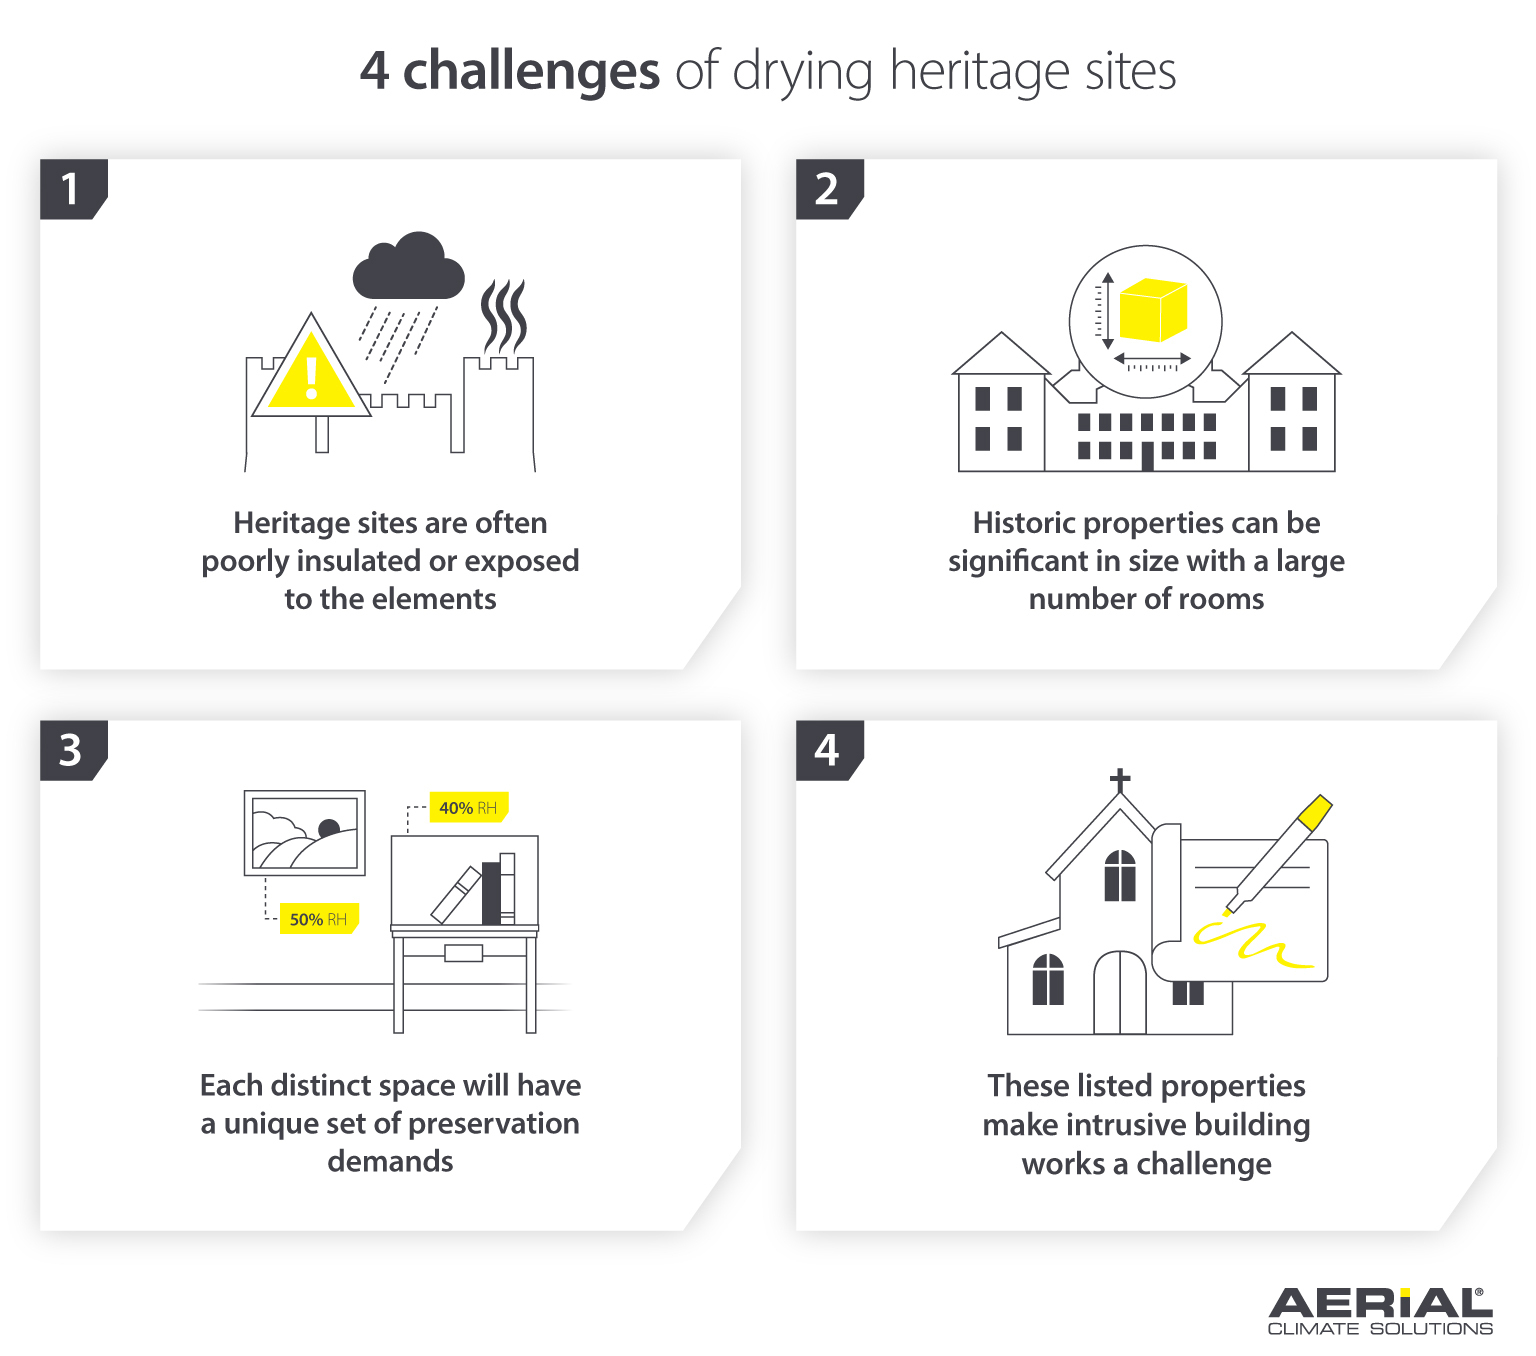 4 challenges of drying heritage sites and preserving contents - Infographic image